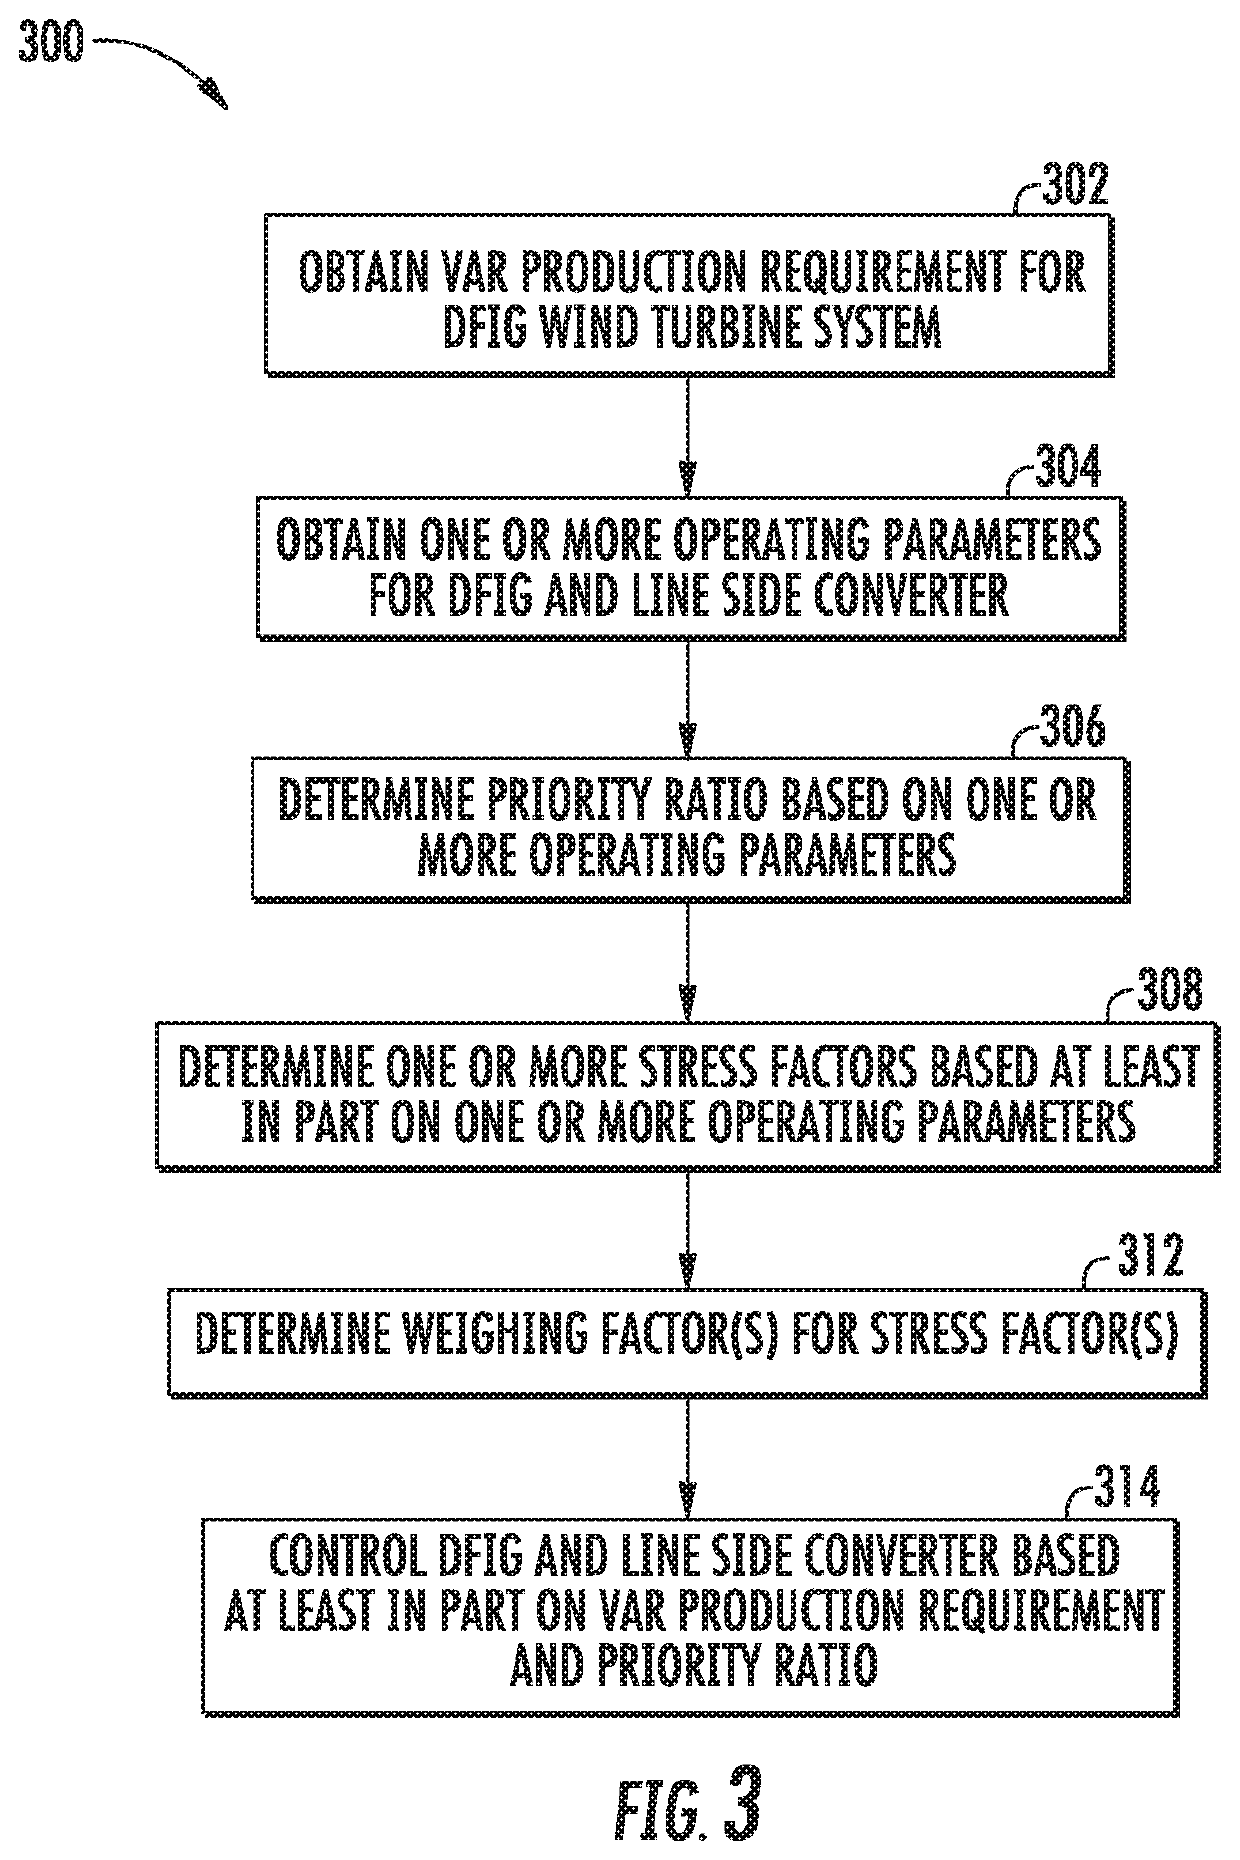 Allocating reactive power production for doubly fed induction generator wind turbine system